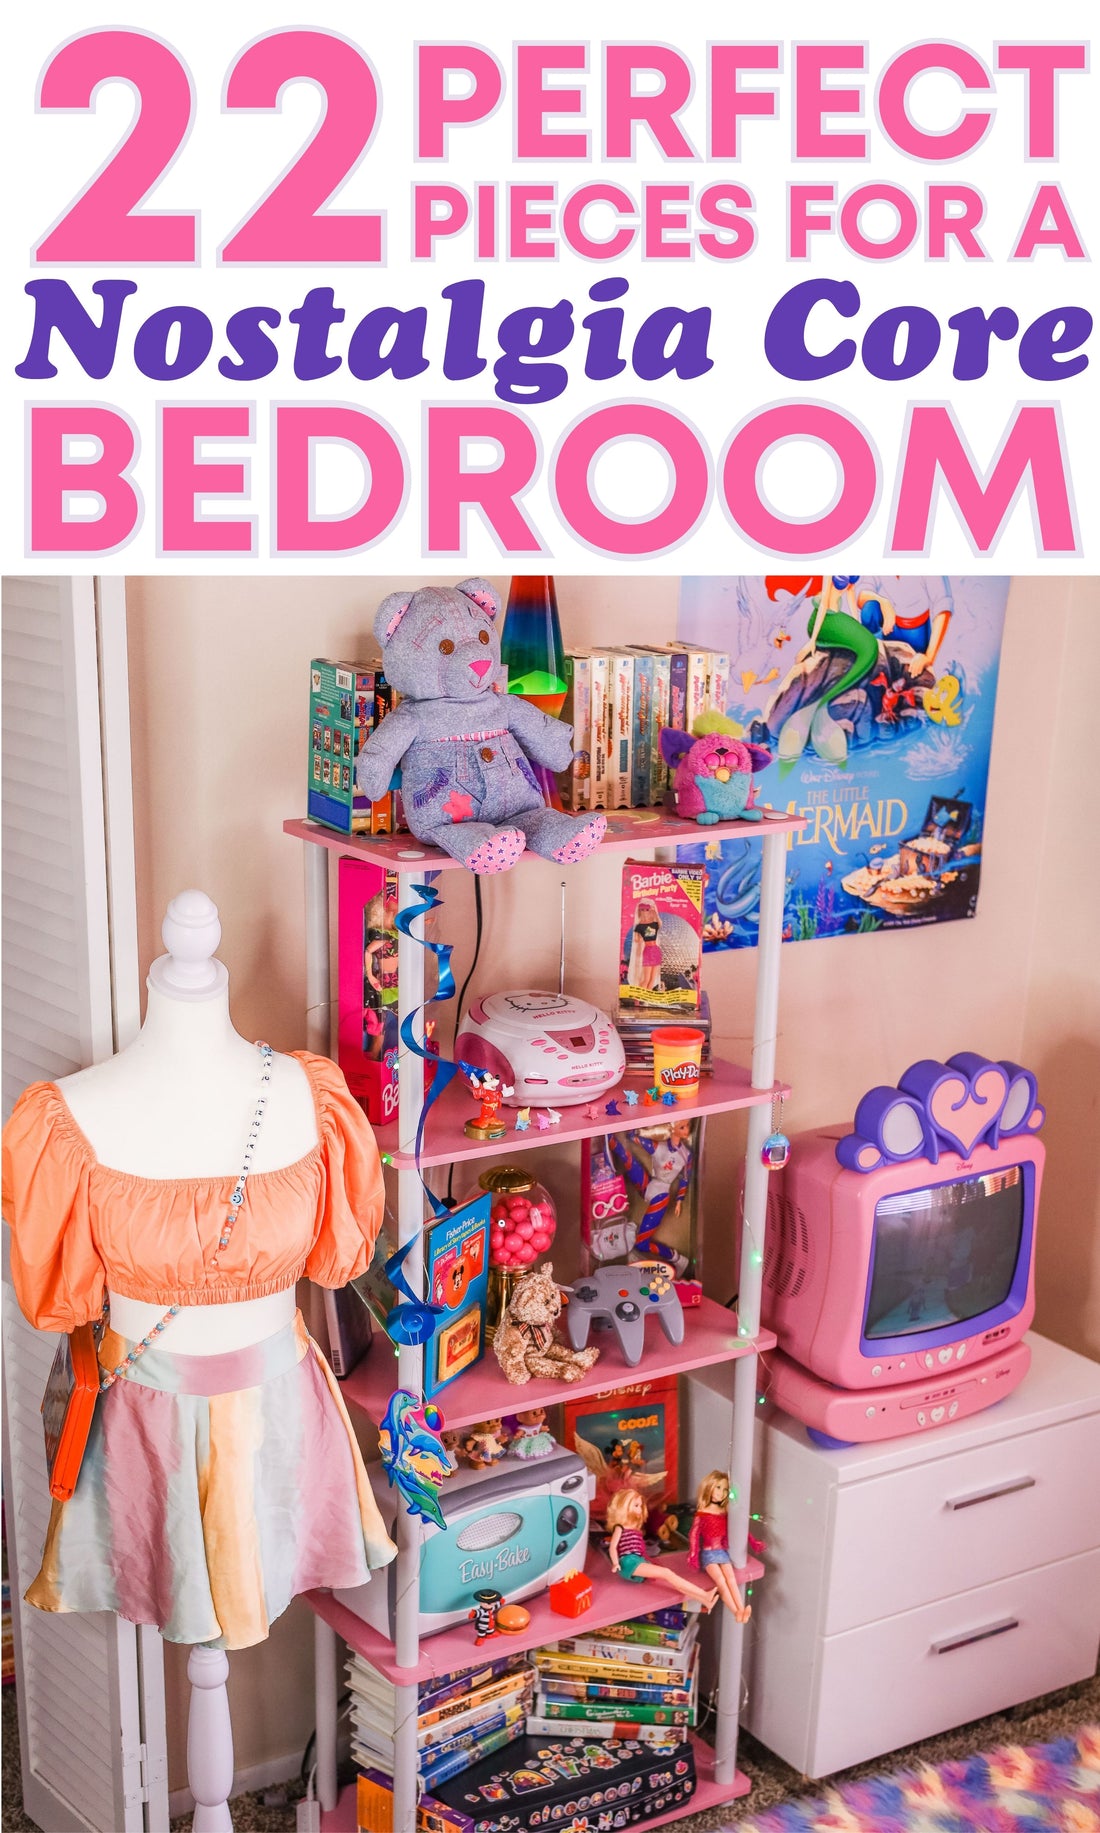 22 PERFECT PIECES FOR A NOSTALGIA CORE BEDROOM